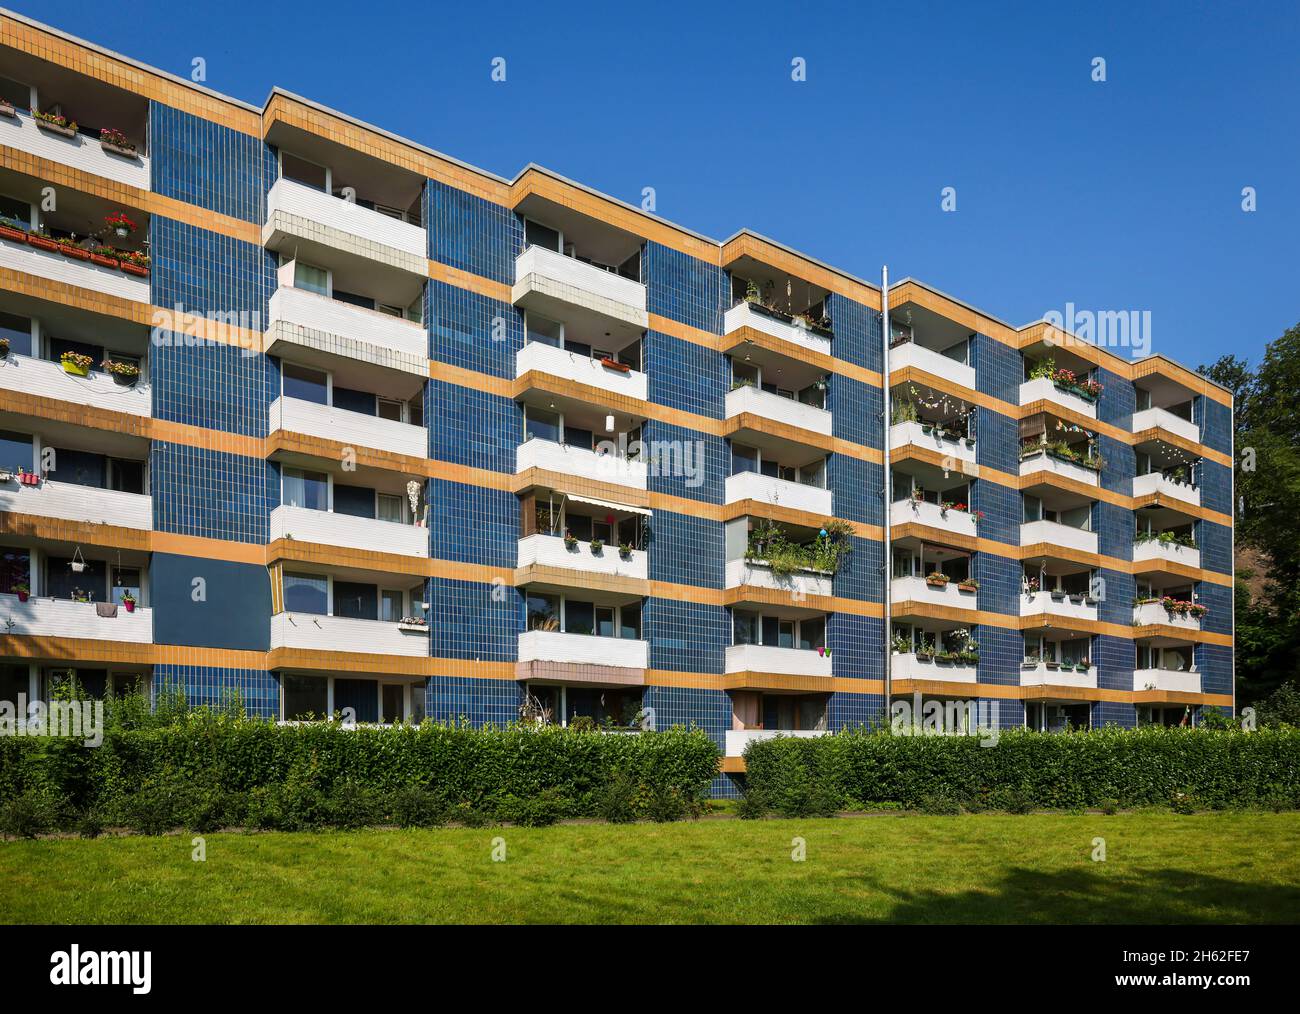 wetter on the ruhr,north rhine-westphalia,germany - block of flats,tenement house,rental apartments. Stock Photo